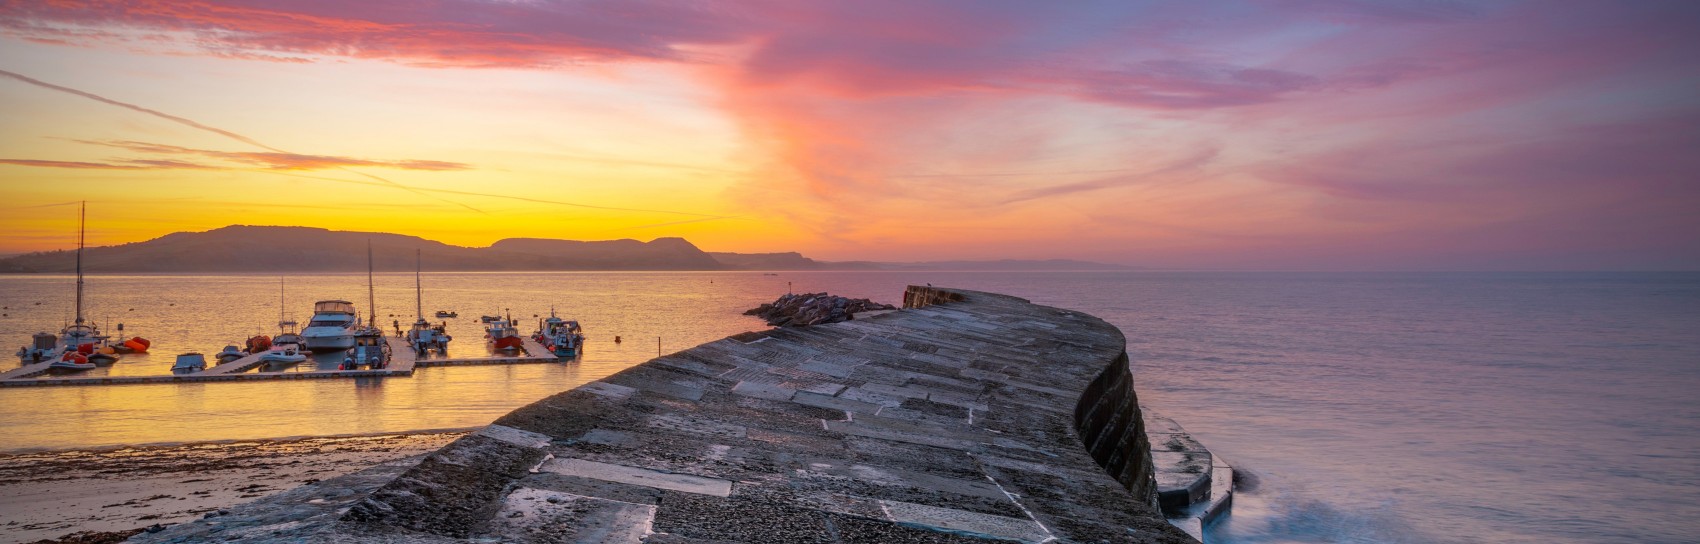 Sunrise over The Cob in Lyme Regis. Photograph by ADRIAN BAKER